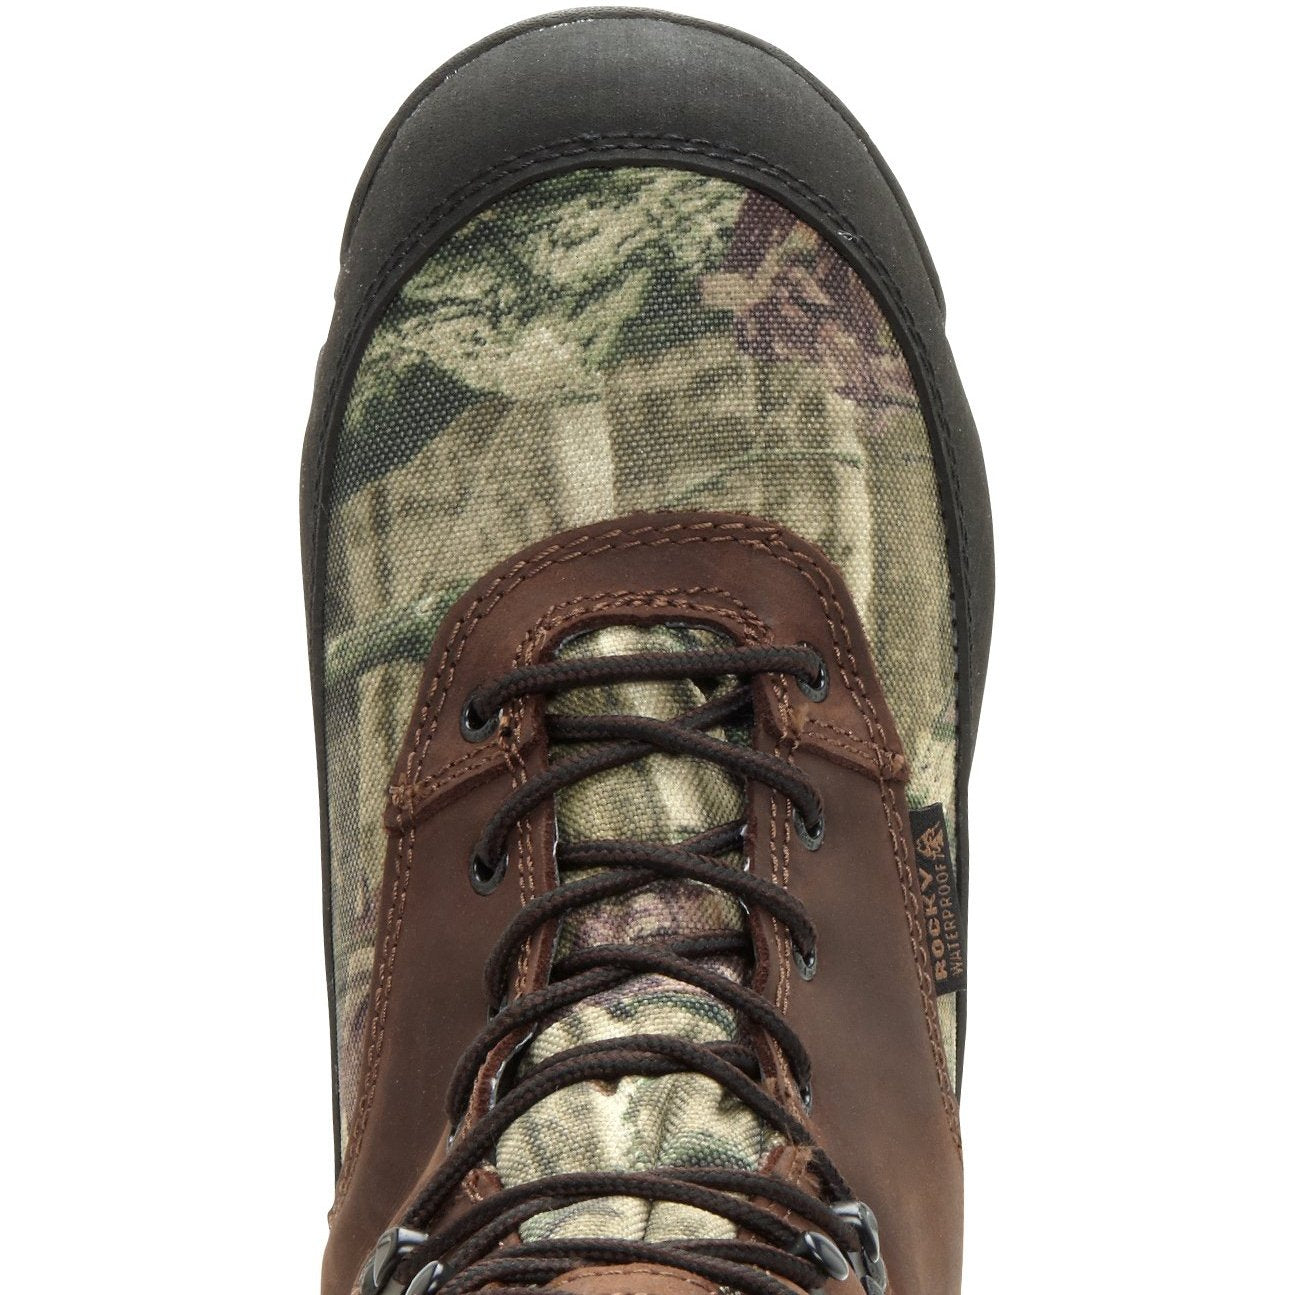 Rocky Men's Core 8" WP 800G Thinsulate Hunt Boot - Brown - FQ0004755  - Overlook Boots